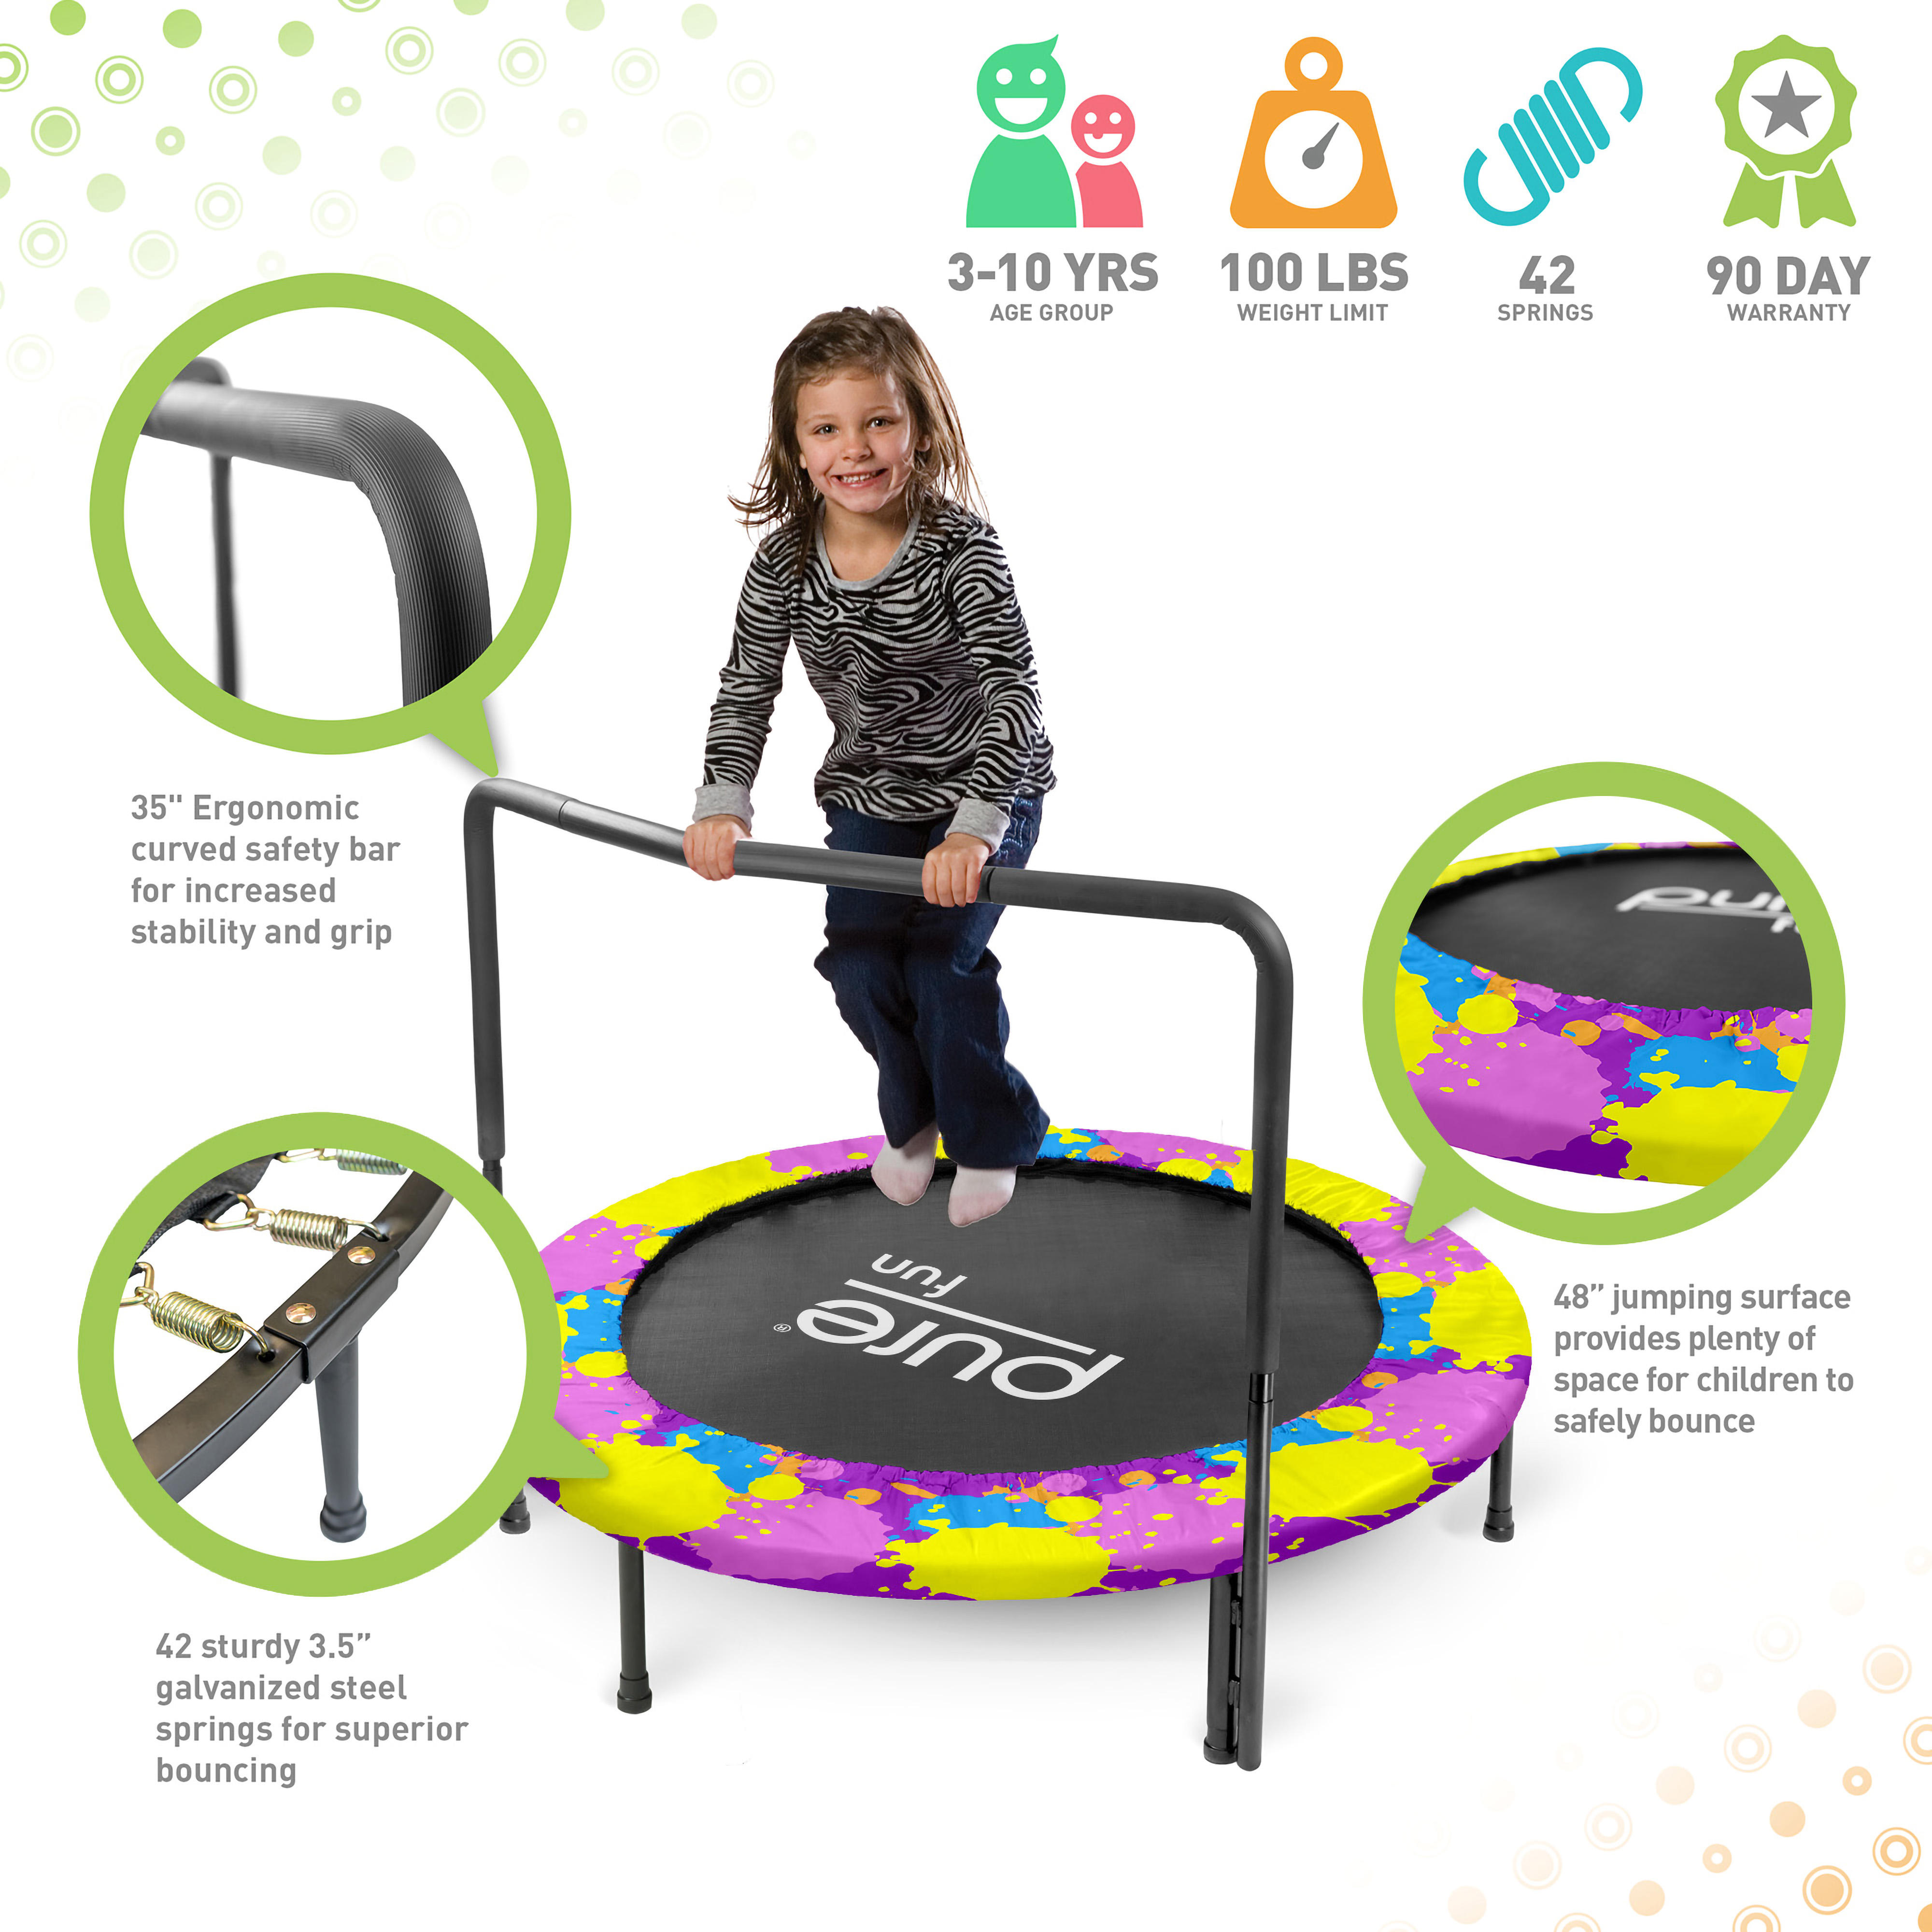 Pure Fun Super Jumper Kids 48-Inch Trampoline with Handrail, Paint - image 5 of 5